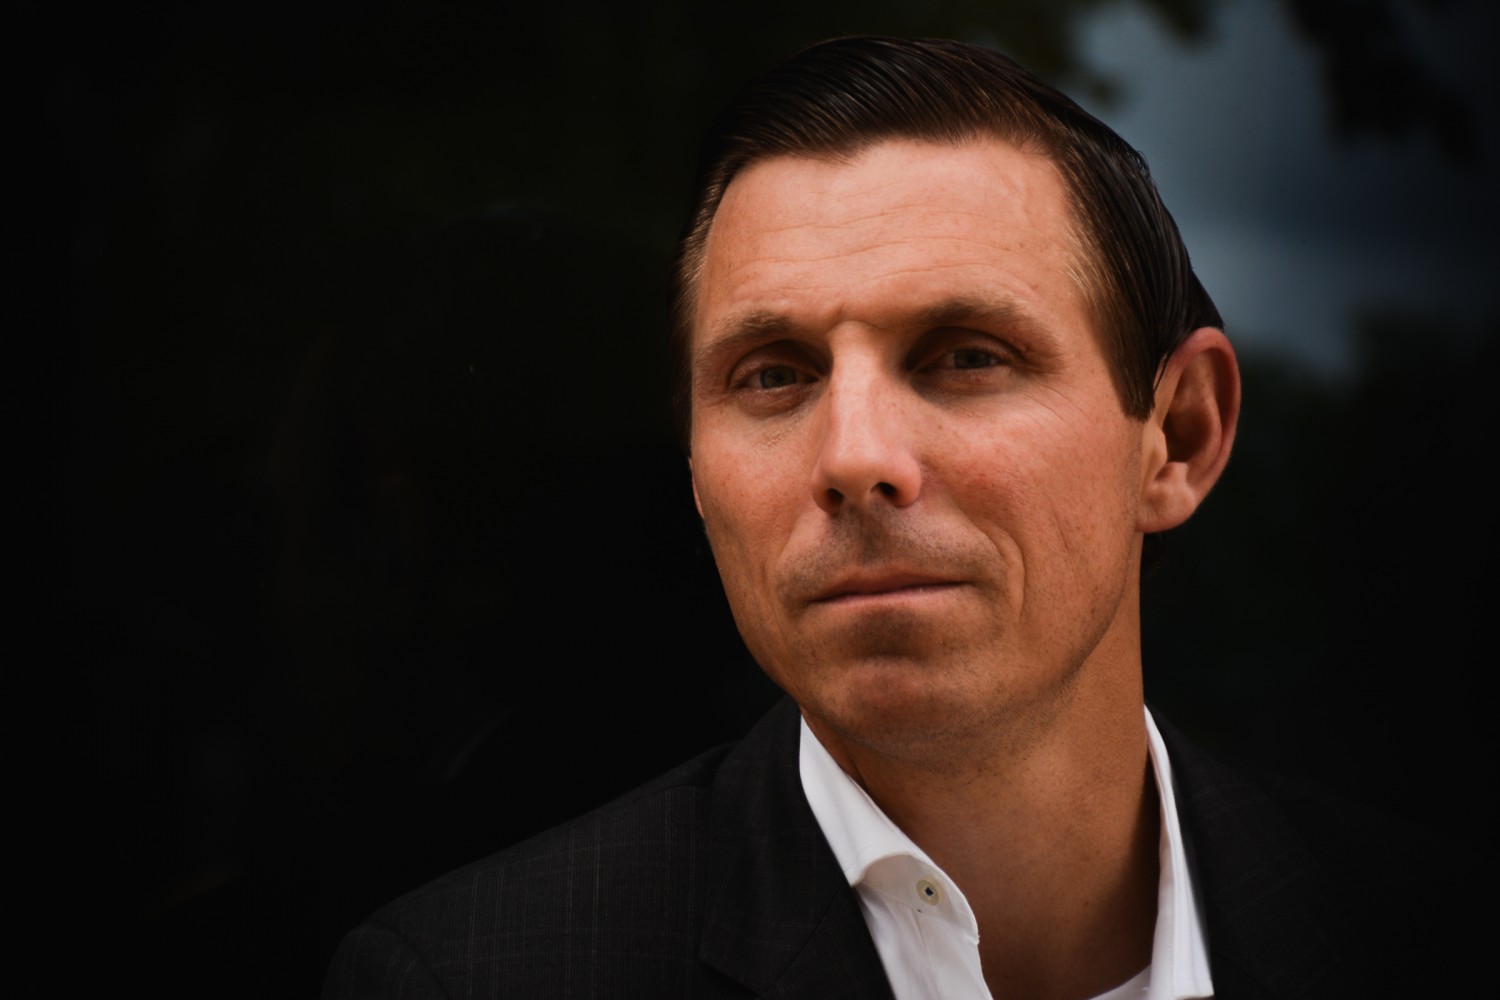 Now that he’s won, Patrick Brown has the chance to make all the right moves